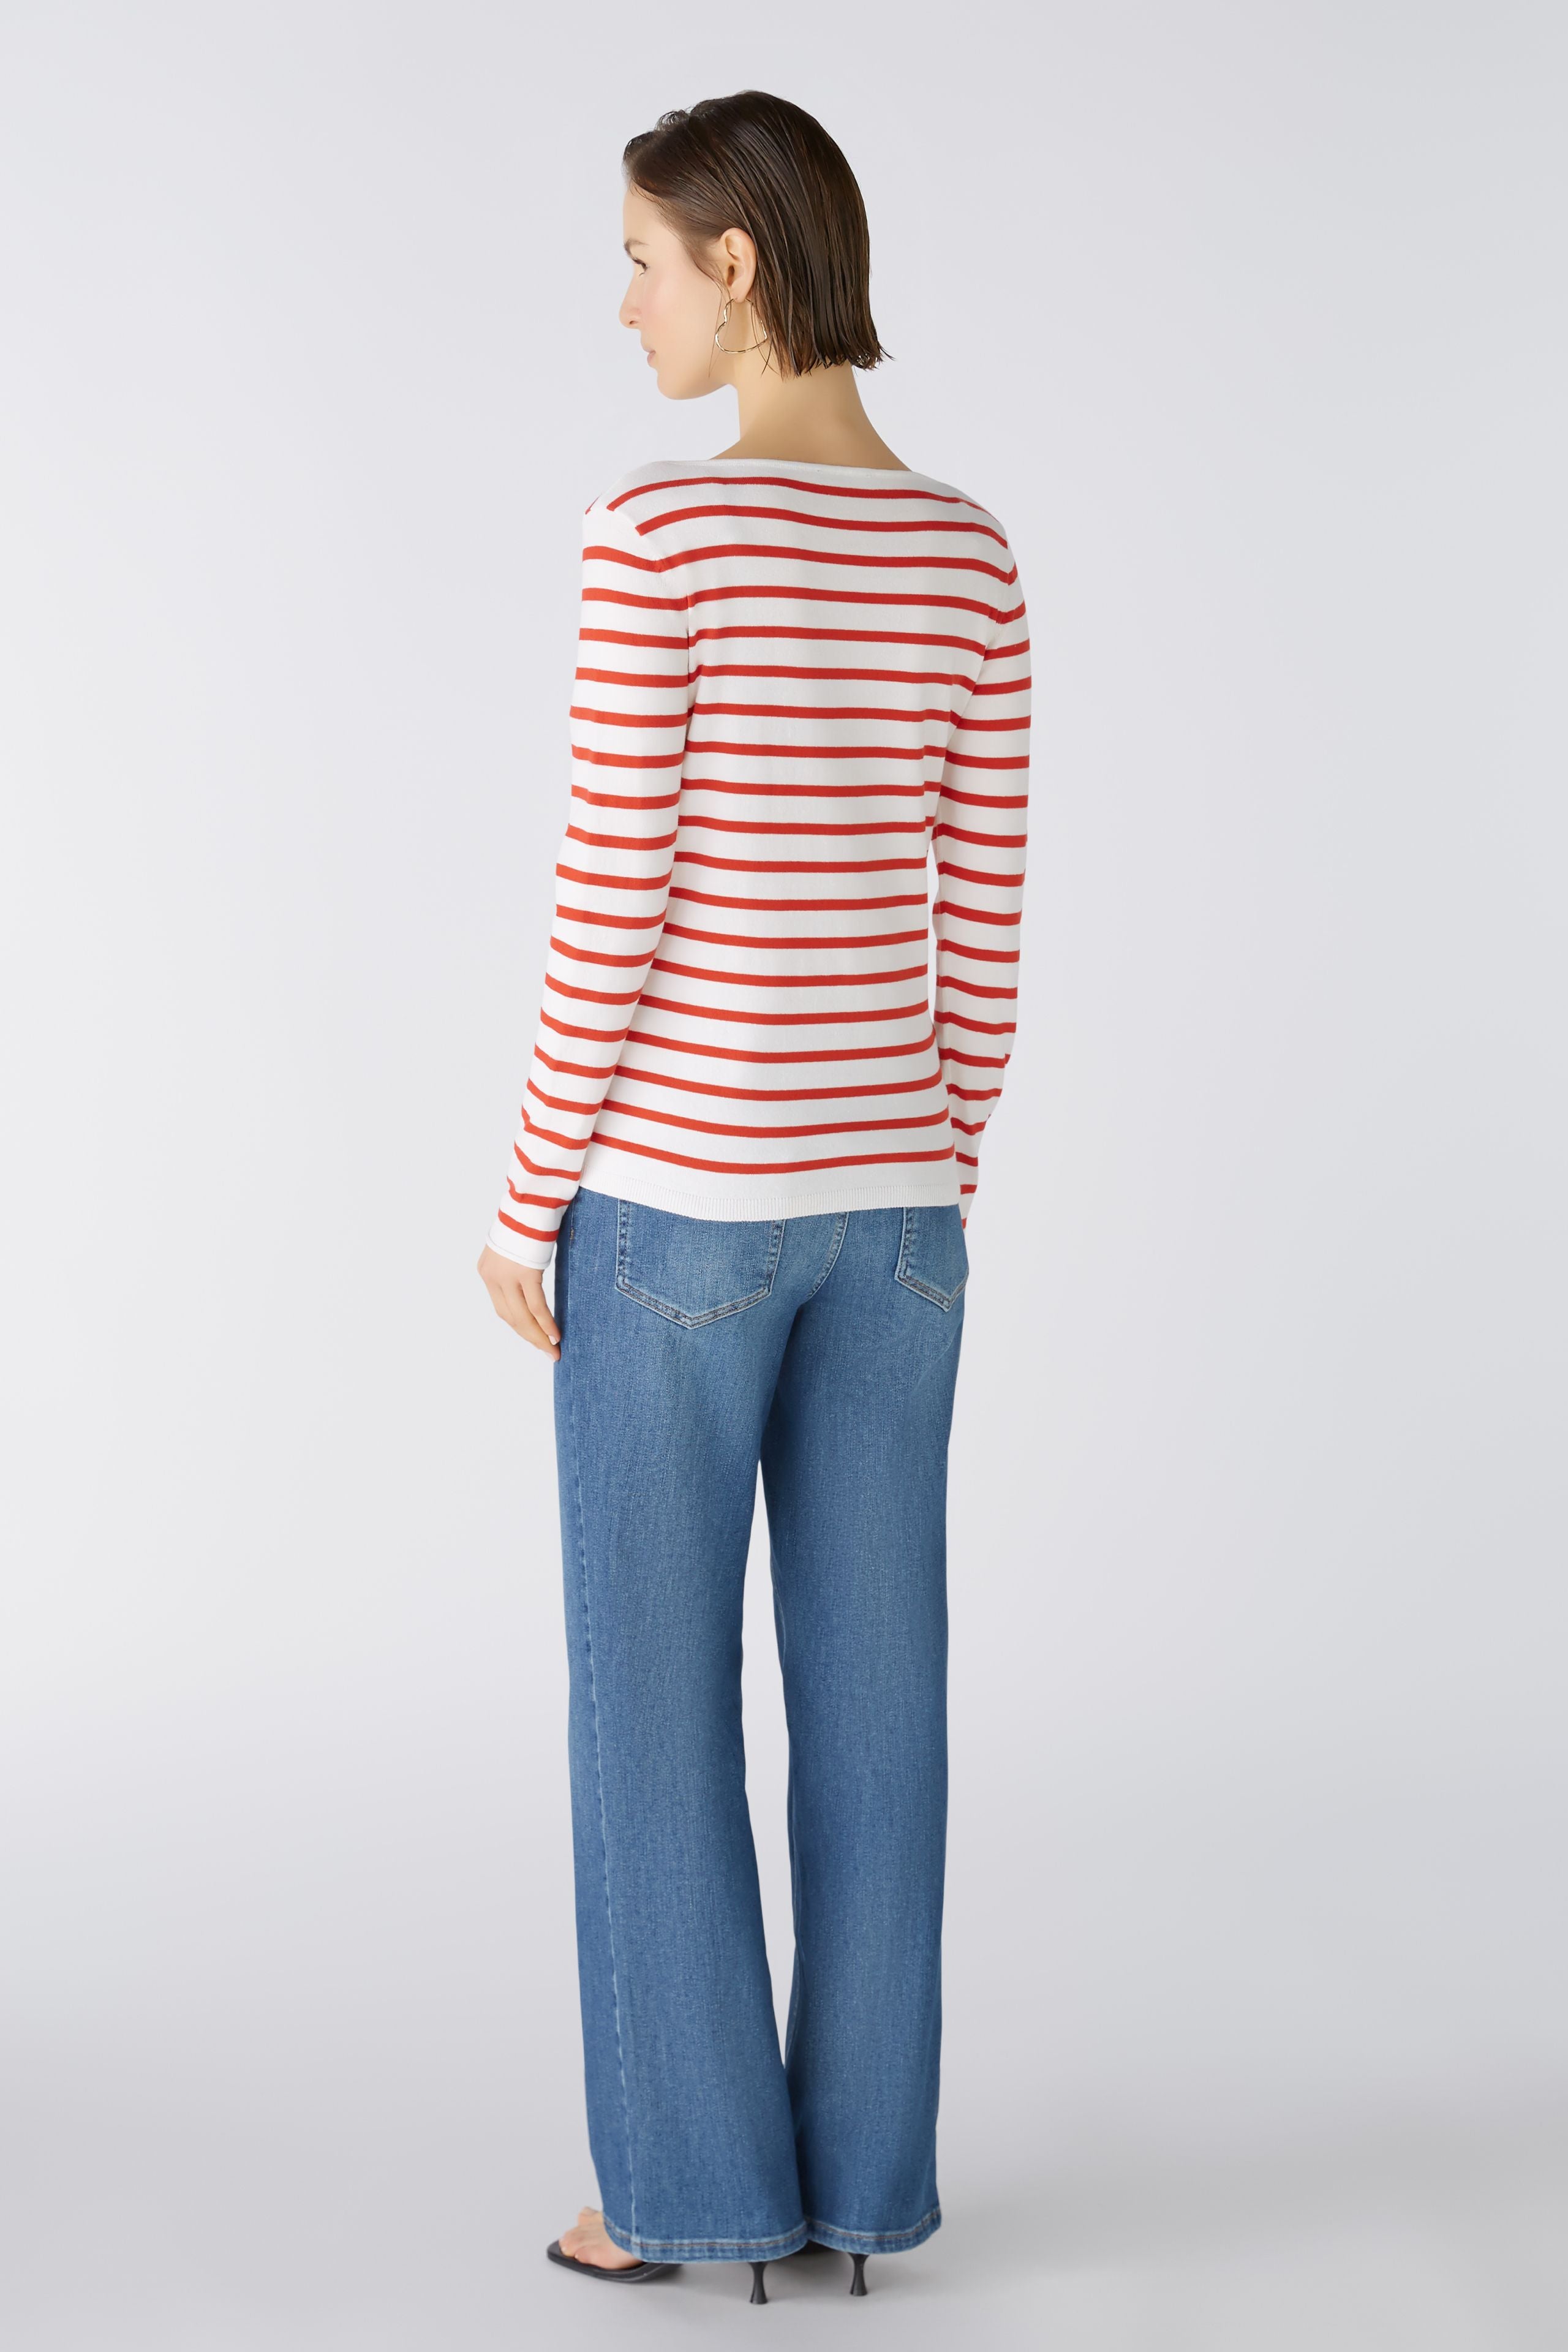 Long Sleeve Stripe Top in White/Red